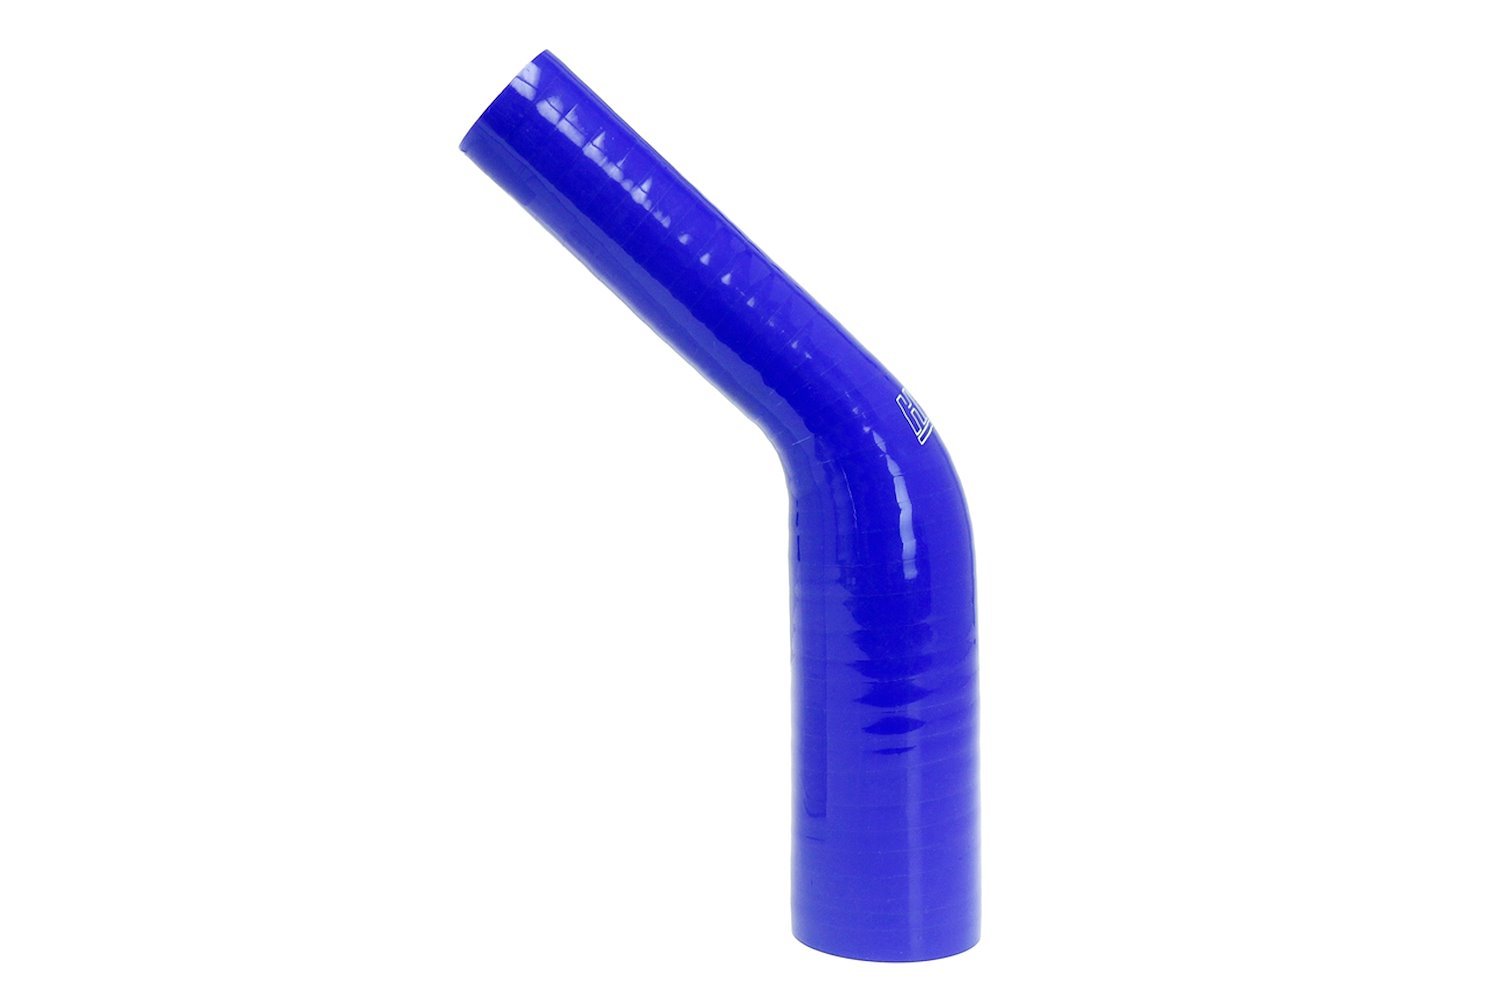 HTSER45-125-200-BLUE Silicone 45-Degree Elbow Hose, High-Temp 4-Ply Reinforced, 1-1/4 in. - 2 in. ID, Blue